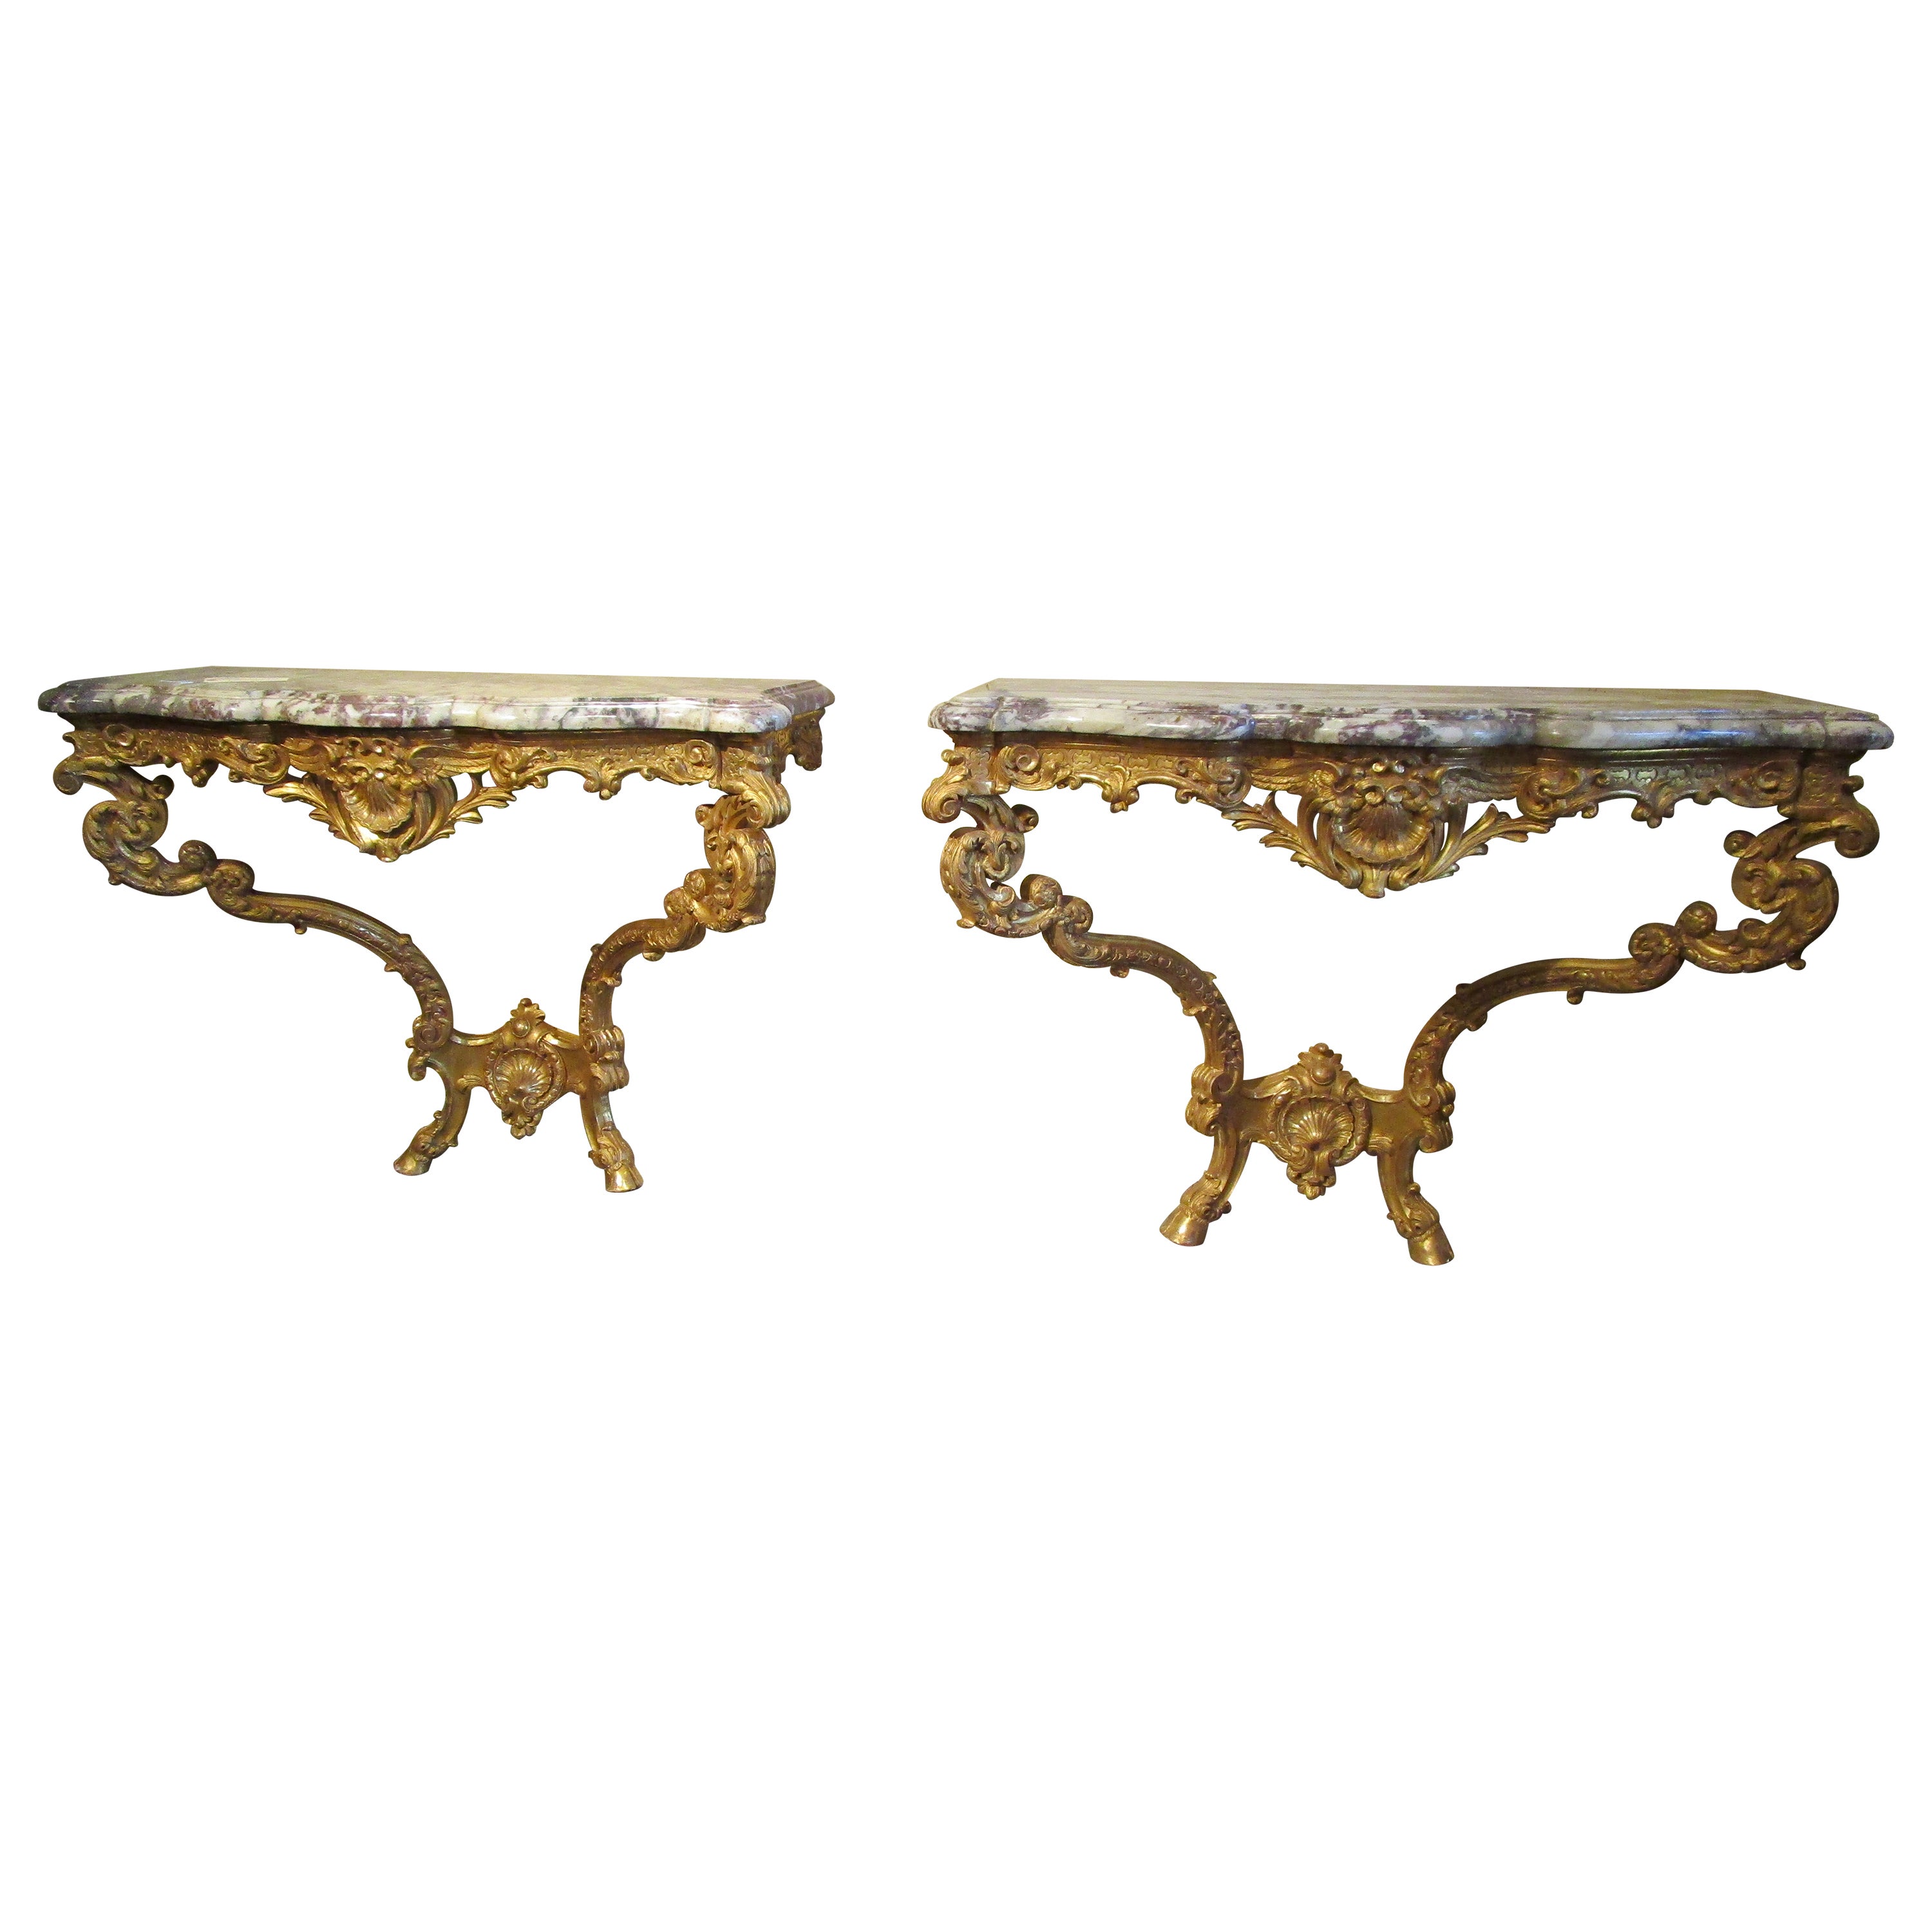 Impressive Pair of Early 19th Century French Louis XV Gilt Consoles